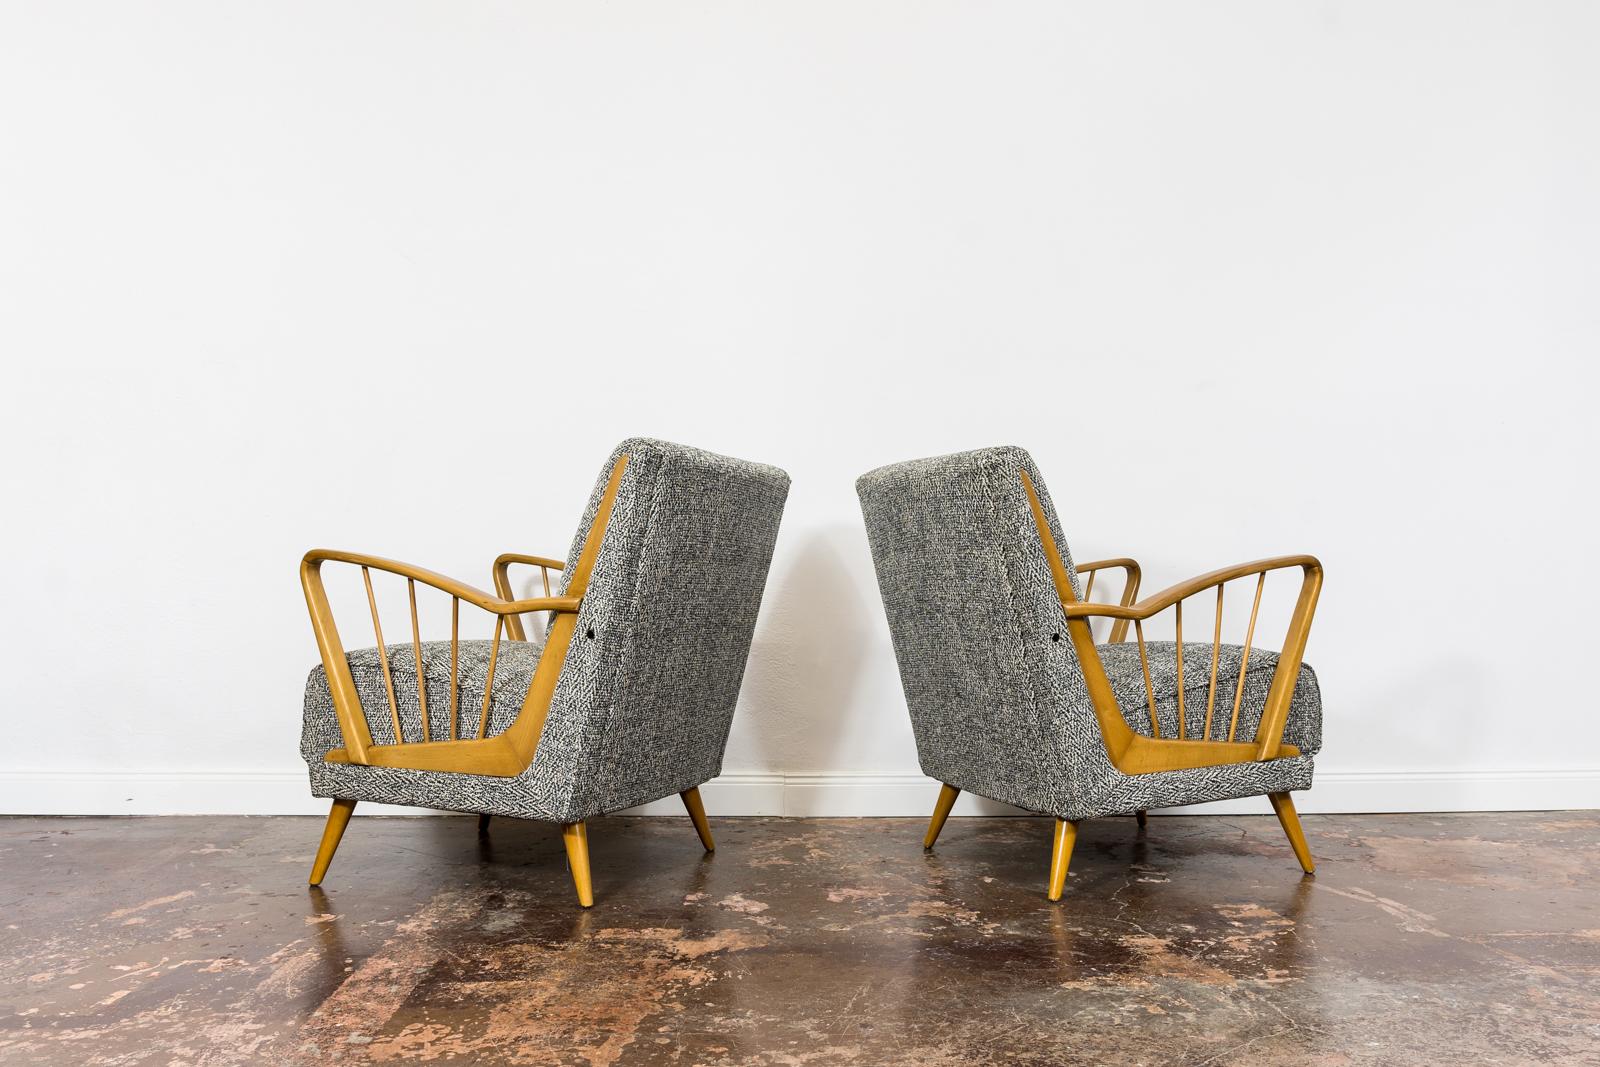 Wood Pair Of Mid-Century Armchairs, 1950's, Germany